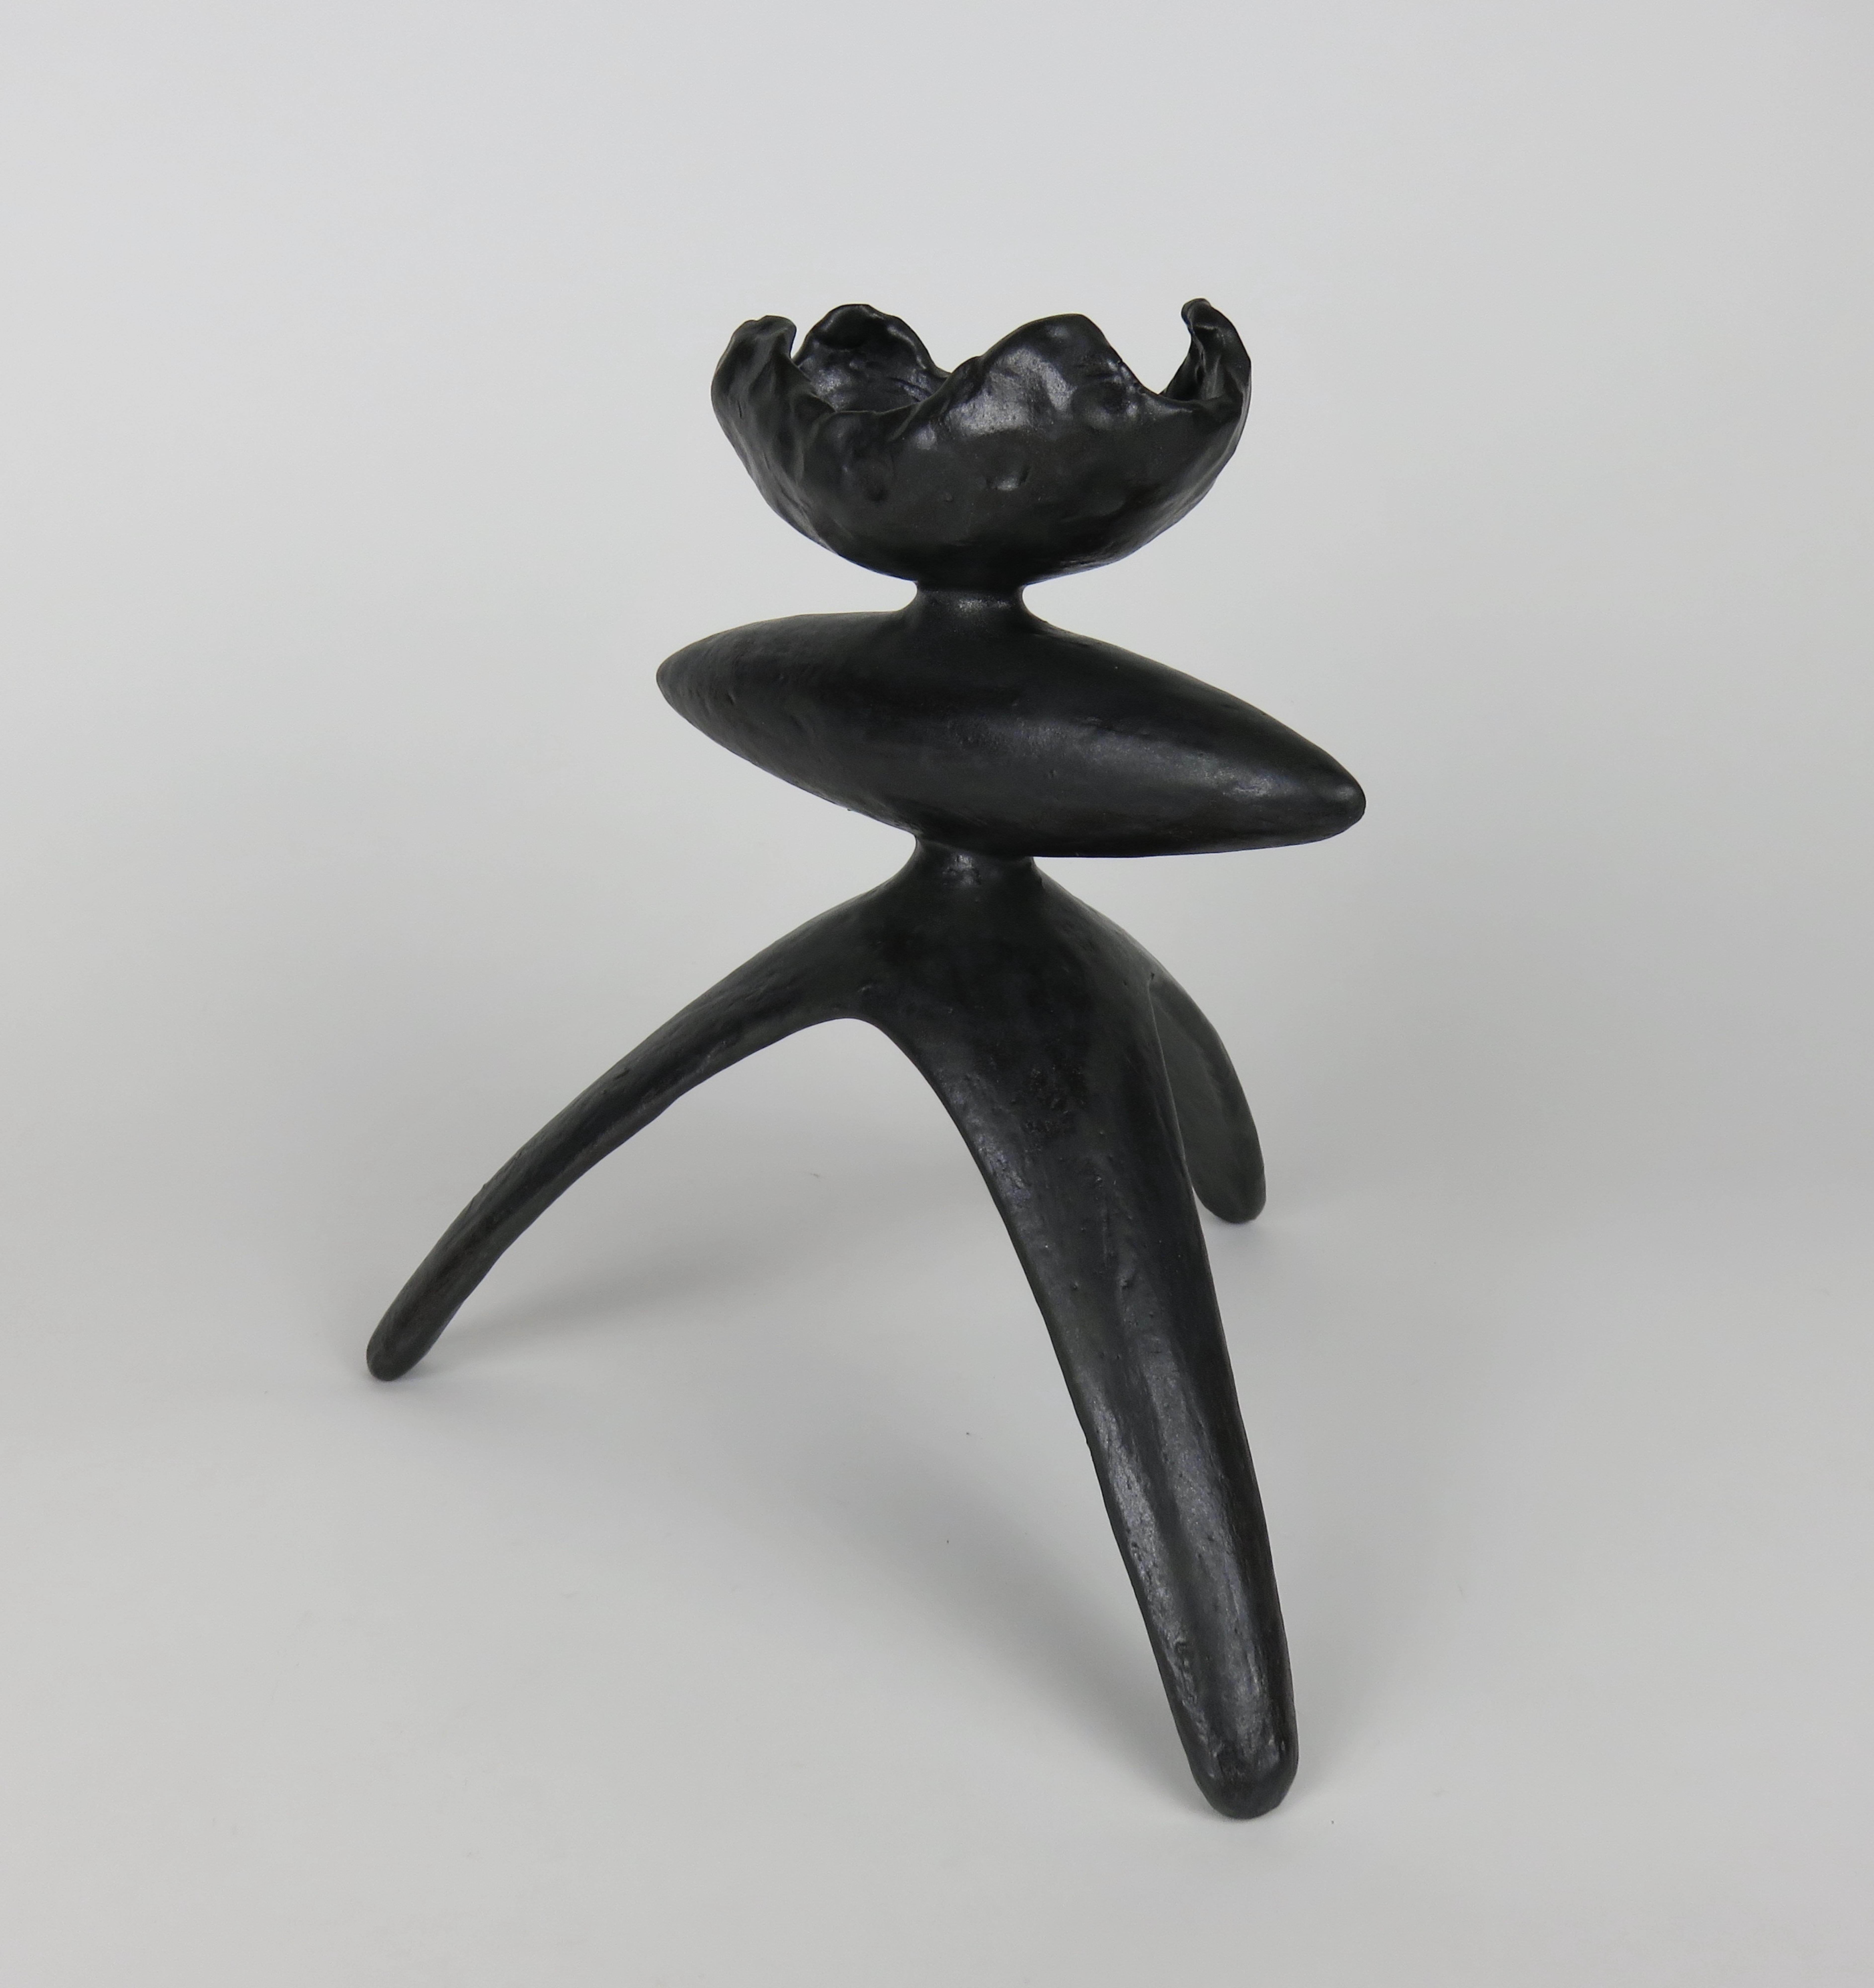 Hand built ceramic sculpture in mottled black glaze. This piece, one in a series of Modern TOTEMS has a crimped curve open top, an elongated center form, tripod legs and a luscious black glaze. Each part is hand-formed then attached together before